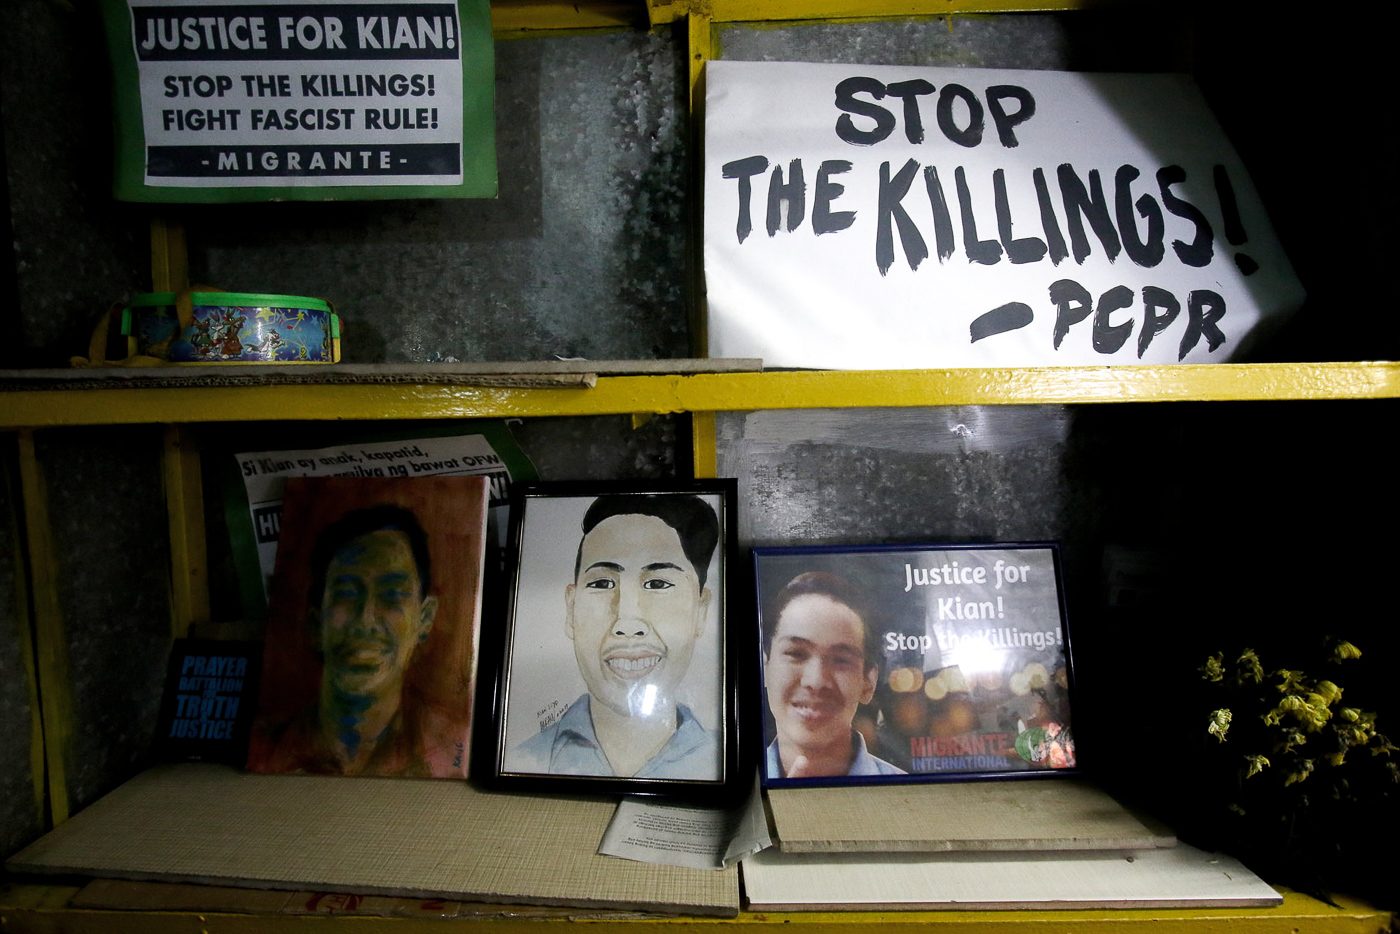 After killings of teenagers, HRW urges UN inquiry into PH drug war